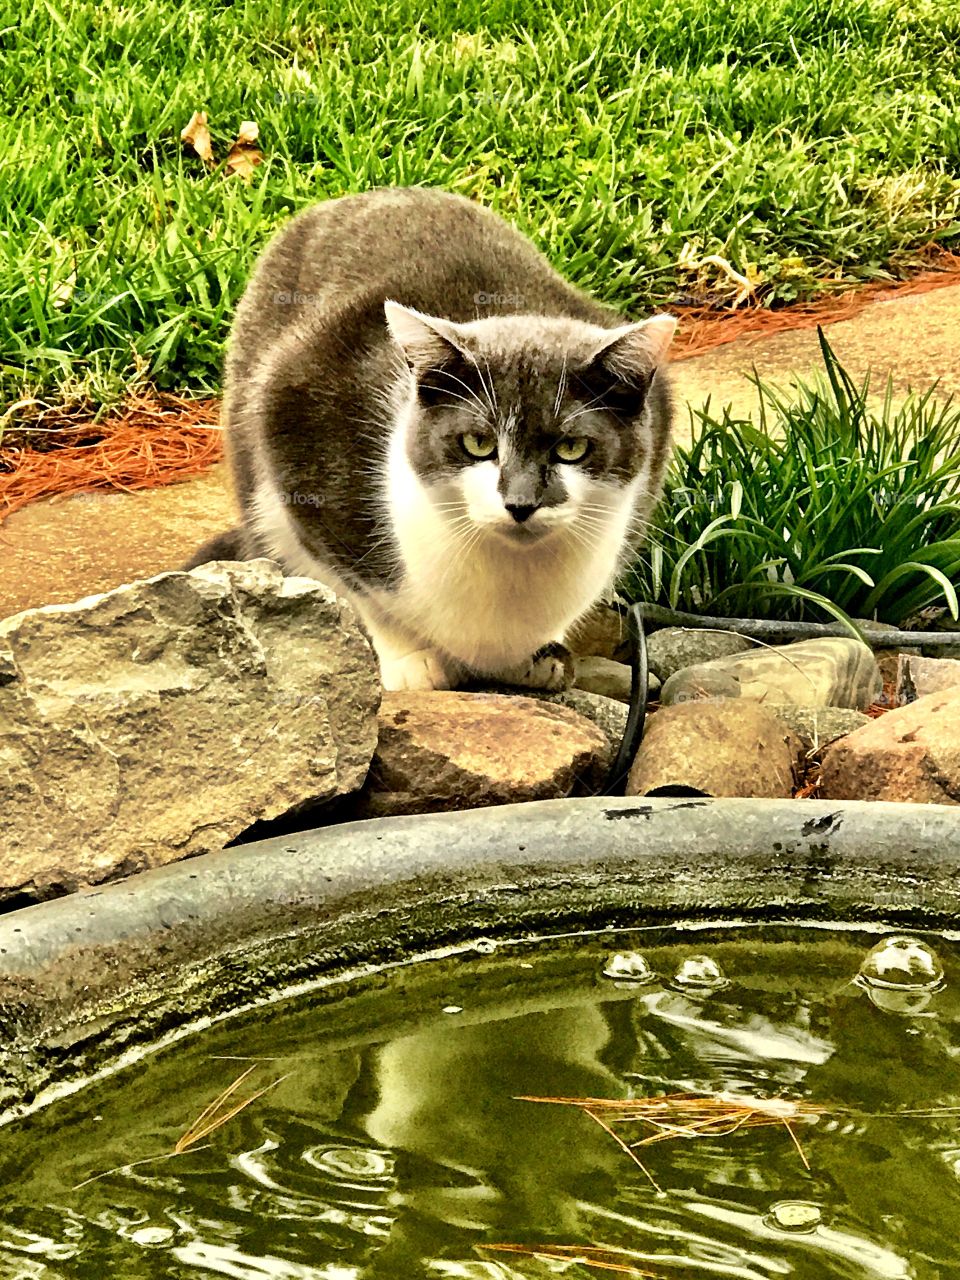 Cute little kitty by the pond. 